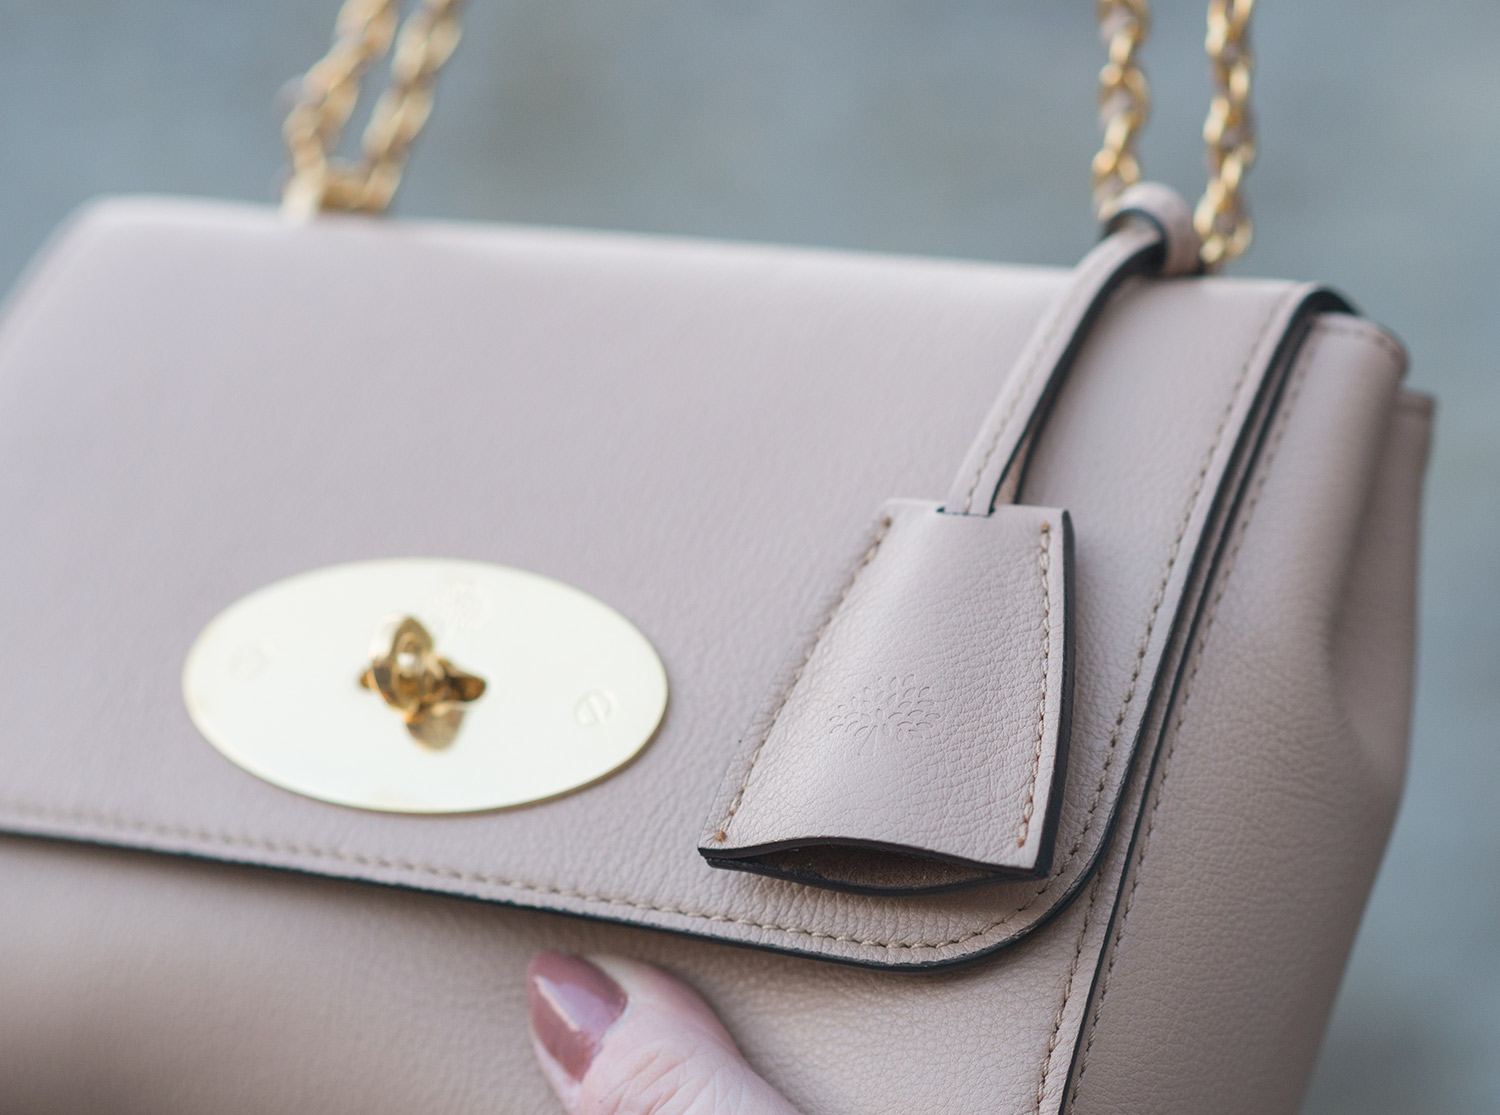 My Mulberry Lily Bag Review In Maple Silky Calf - FORD LA FEMME